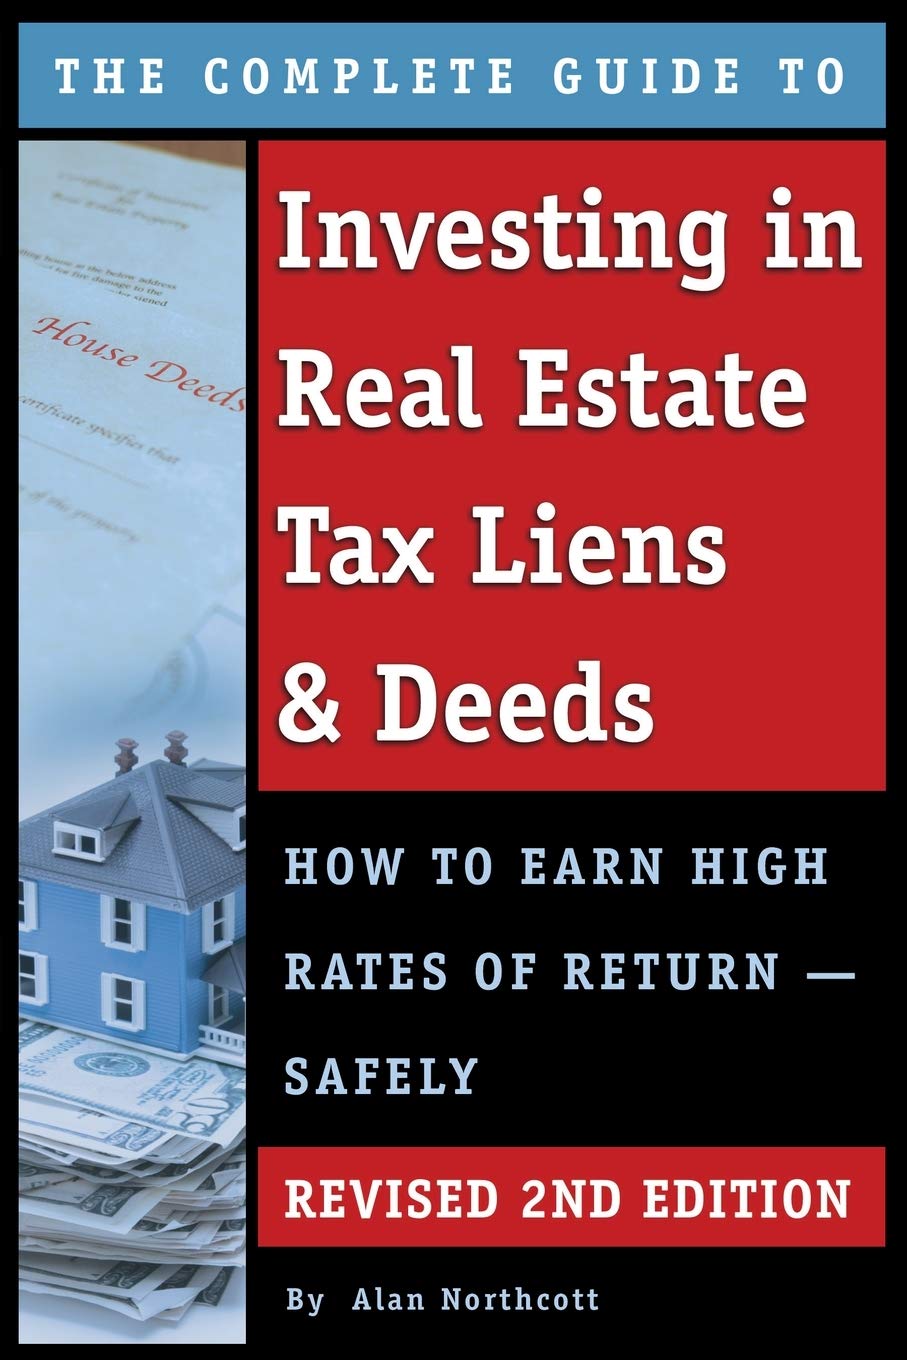 The Complete Guide to Investing in Real Estate Tax Liens & Deeds How to Earn High Rates of Return - Safely REVISED 2ND EDITION